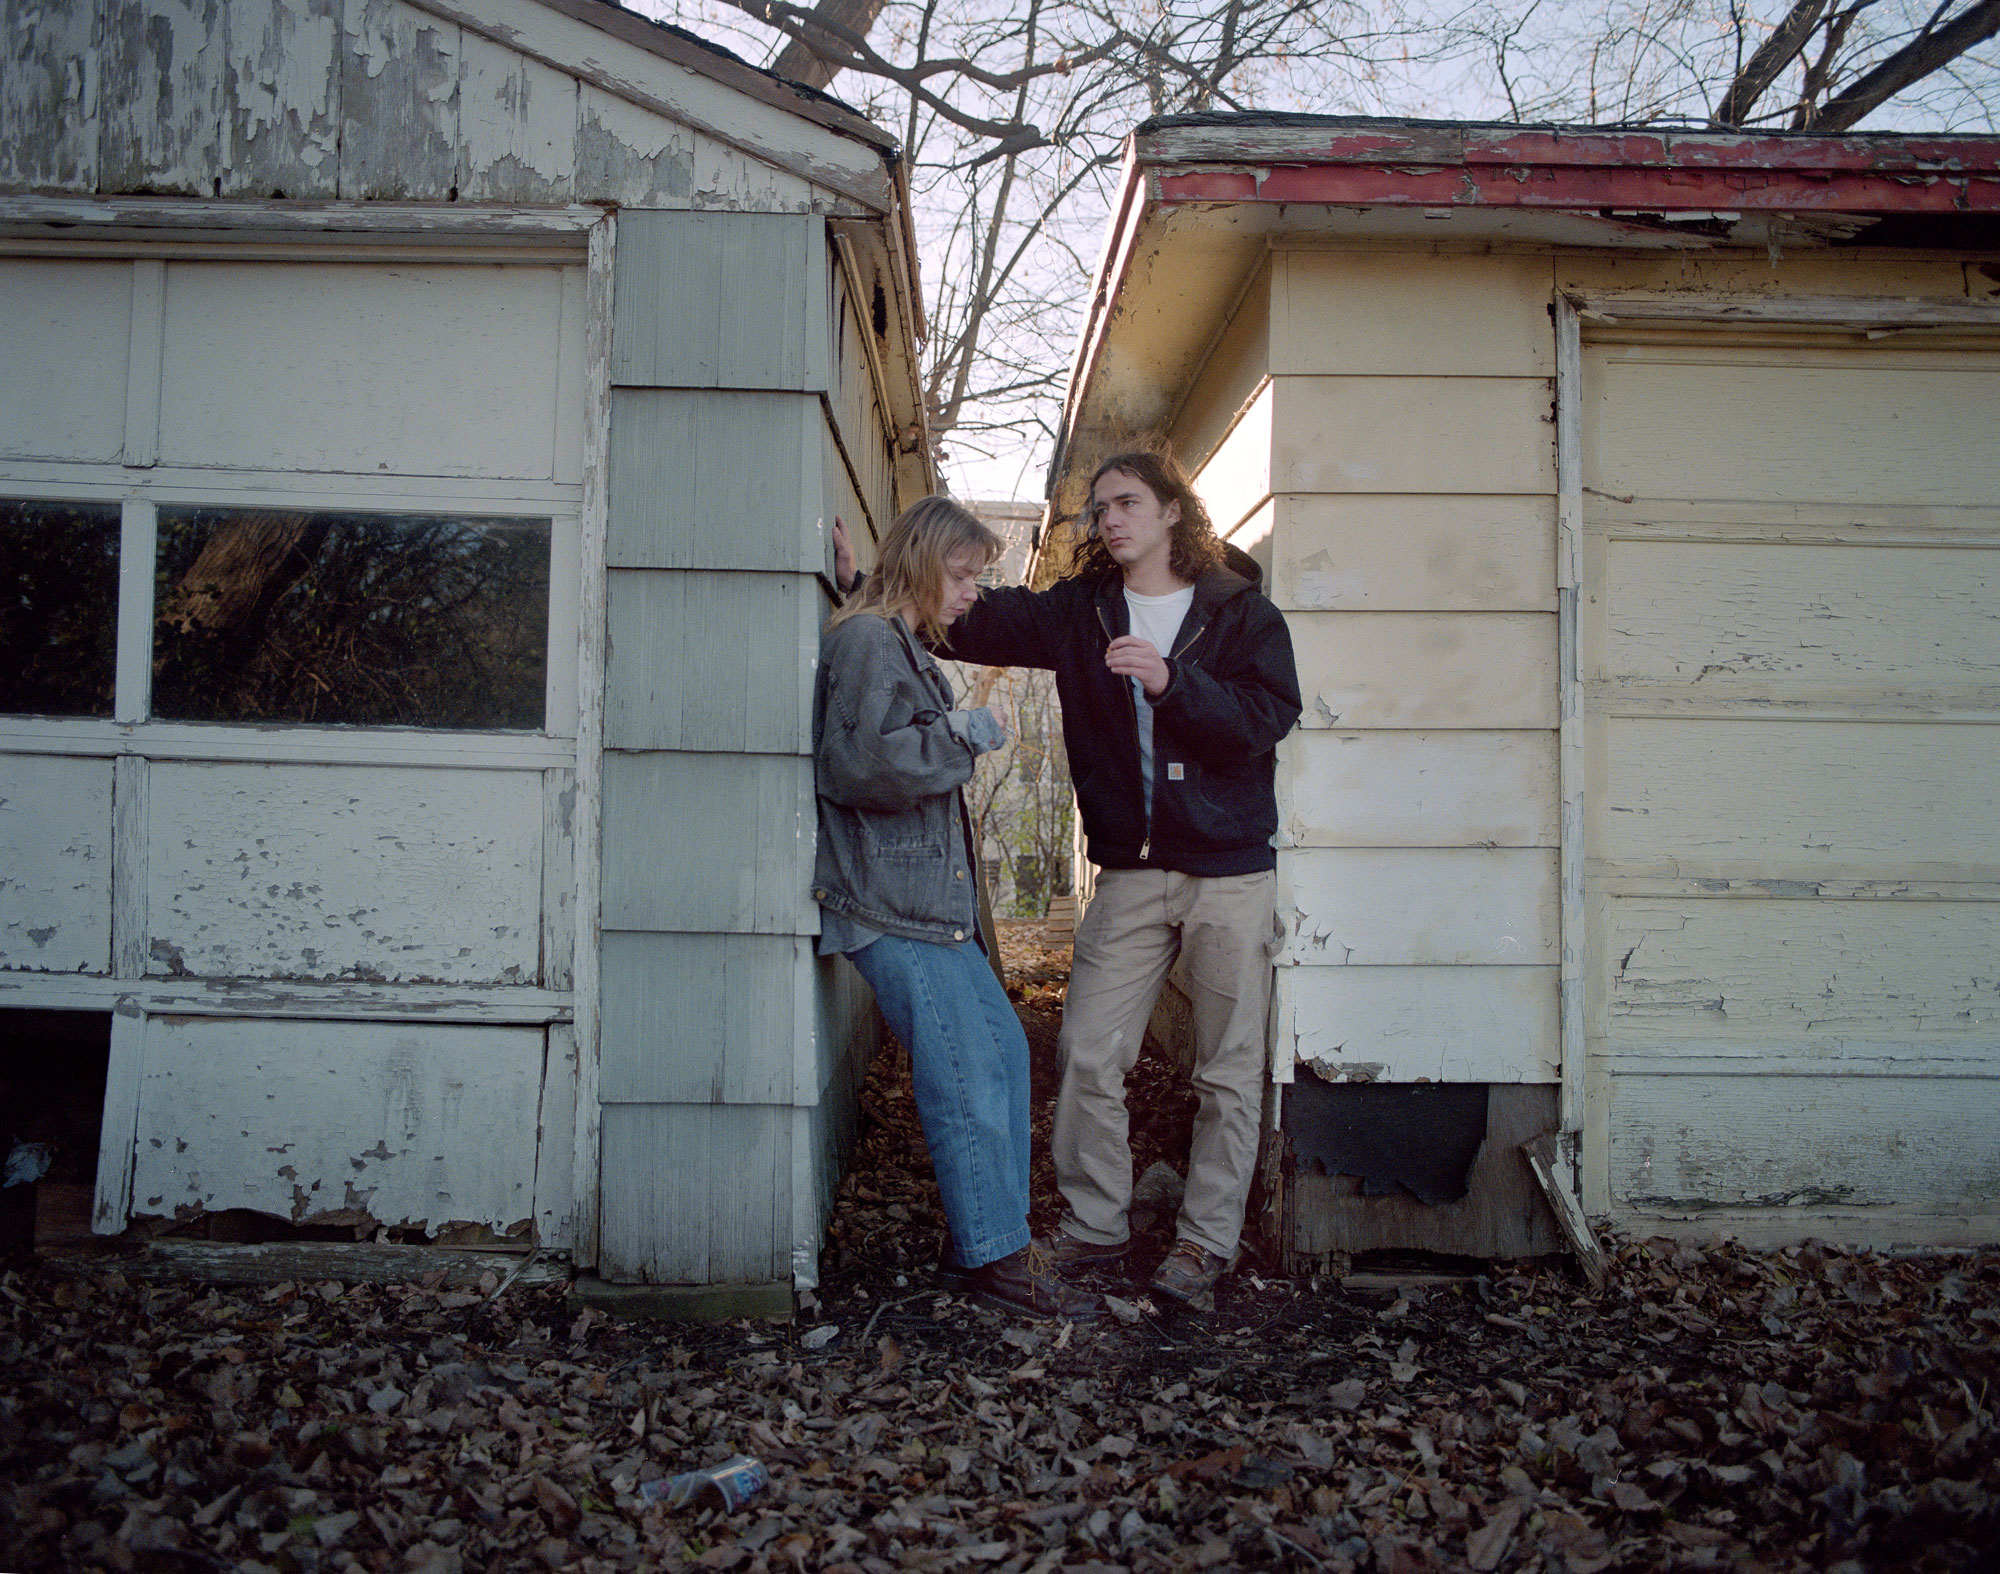 Two young adults talking. They are standing between two sheds.